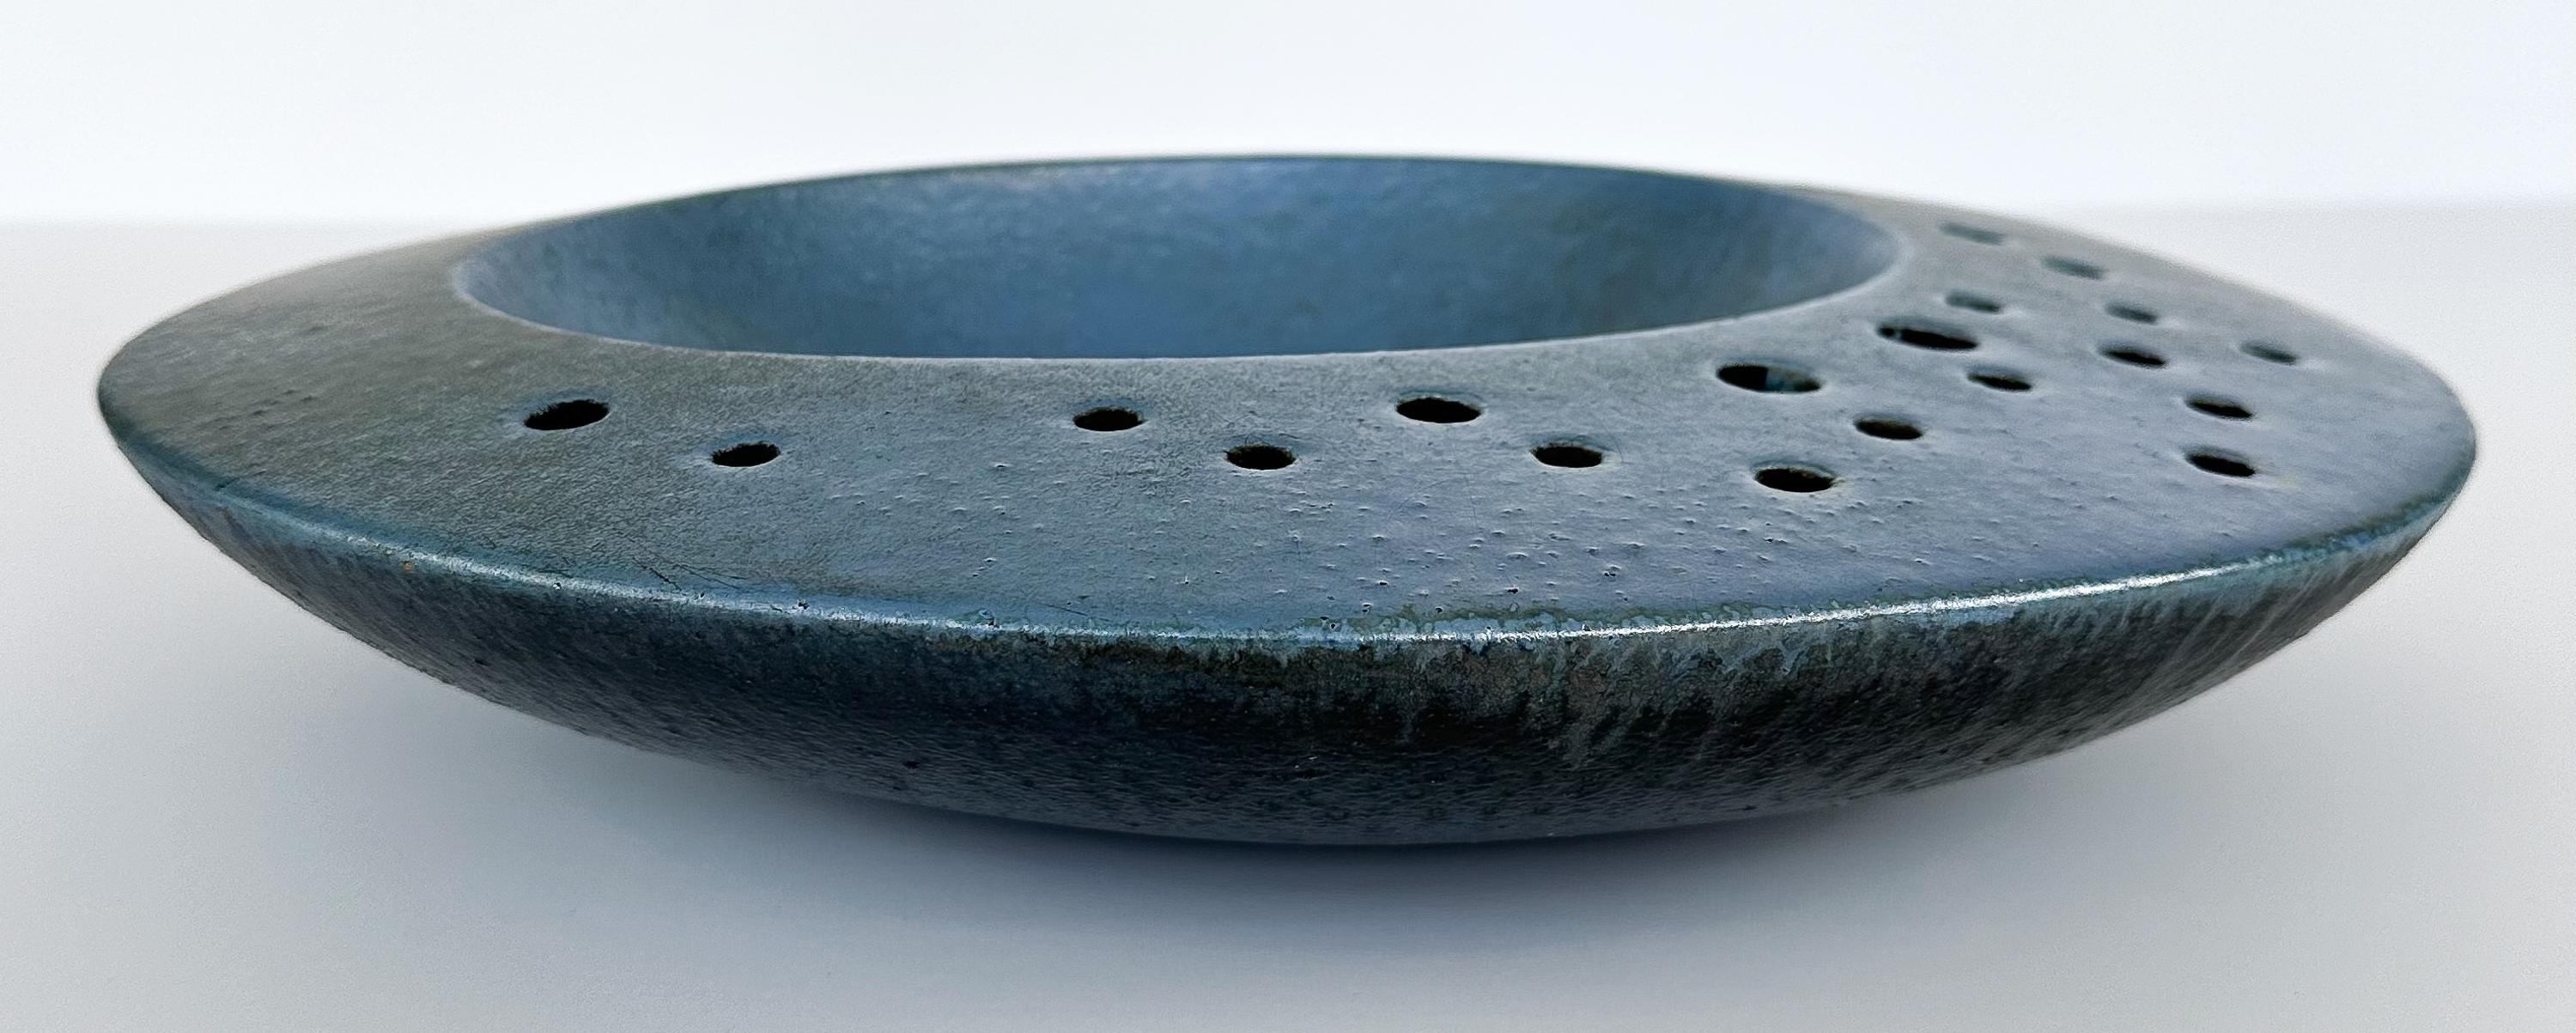 A Renato Bassoli (1915-1982) large pierced sculptural centerpiece bowl from the 'I Sassi' (stones) series made for Il Sestante, Italy circa late 1950s. This is a larger than average example of Bassoli's Il Sassi series measuring 16